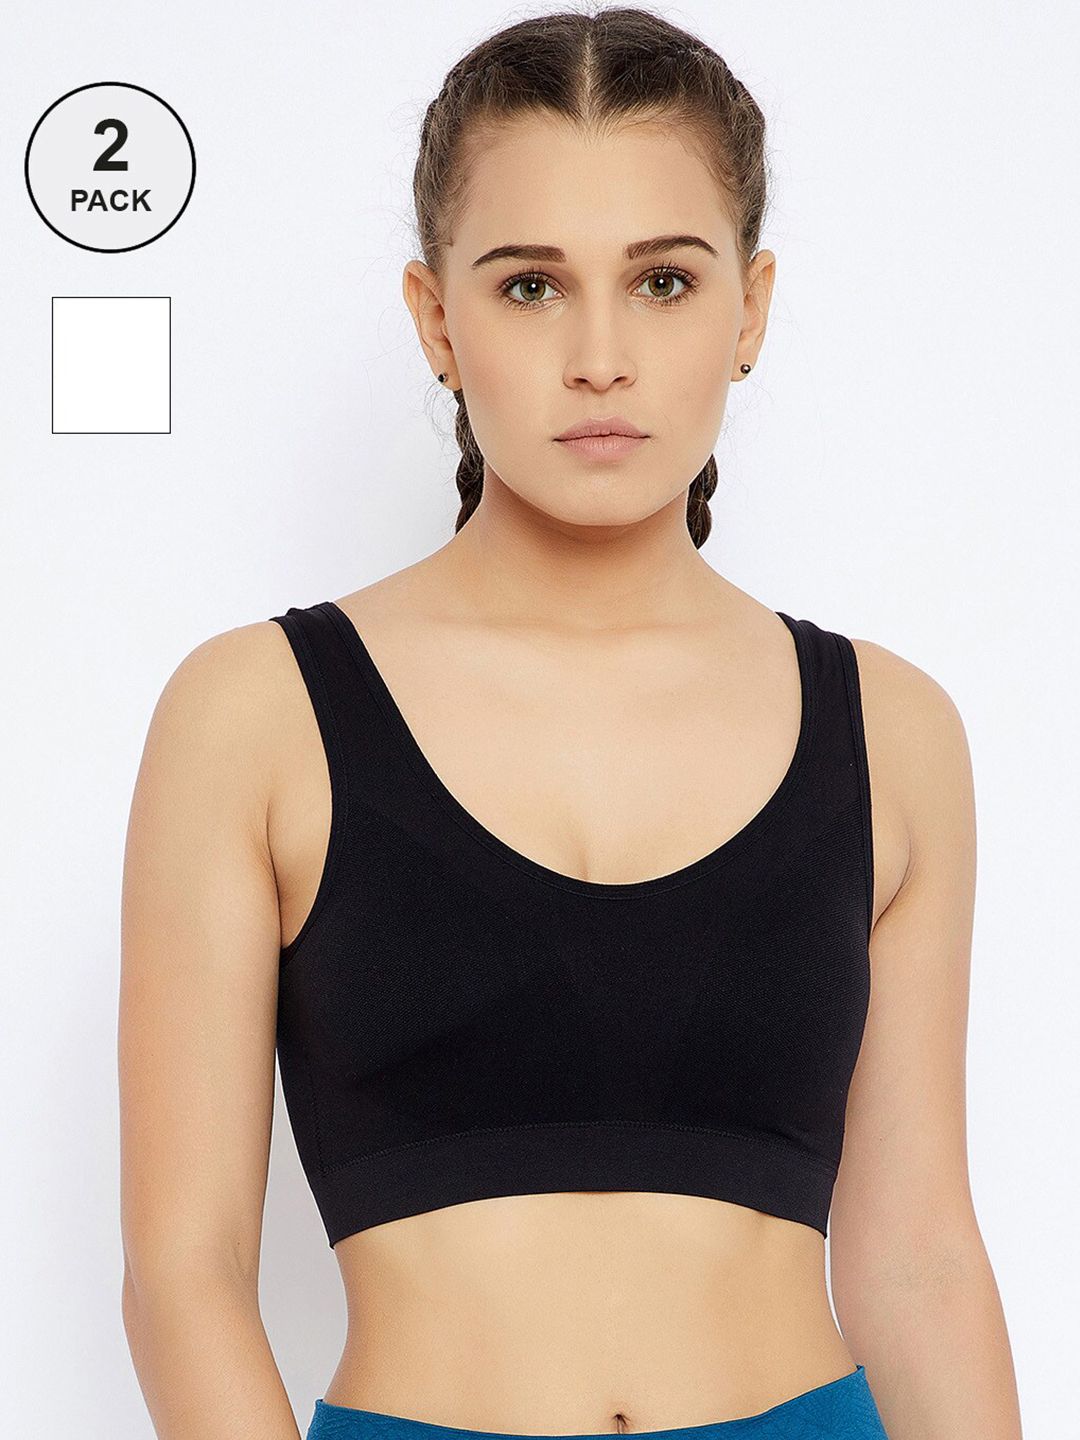 C9 AIRWEAR Pack of 2 Black & White Workout Bra Lightly Padded P2134_BLACK_WHITE Price in India